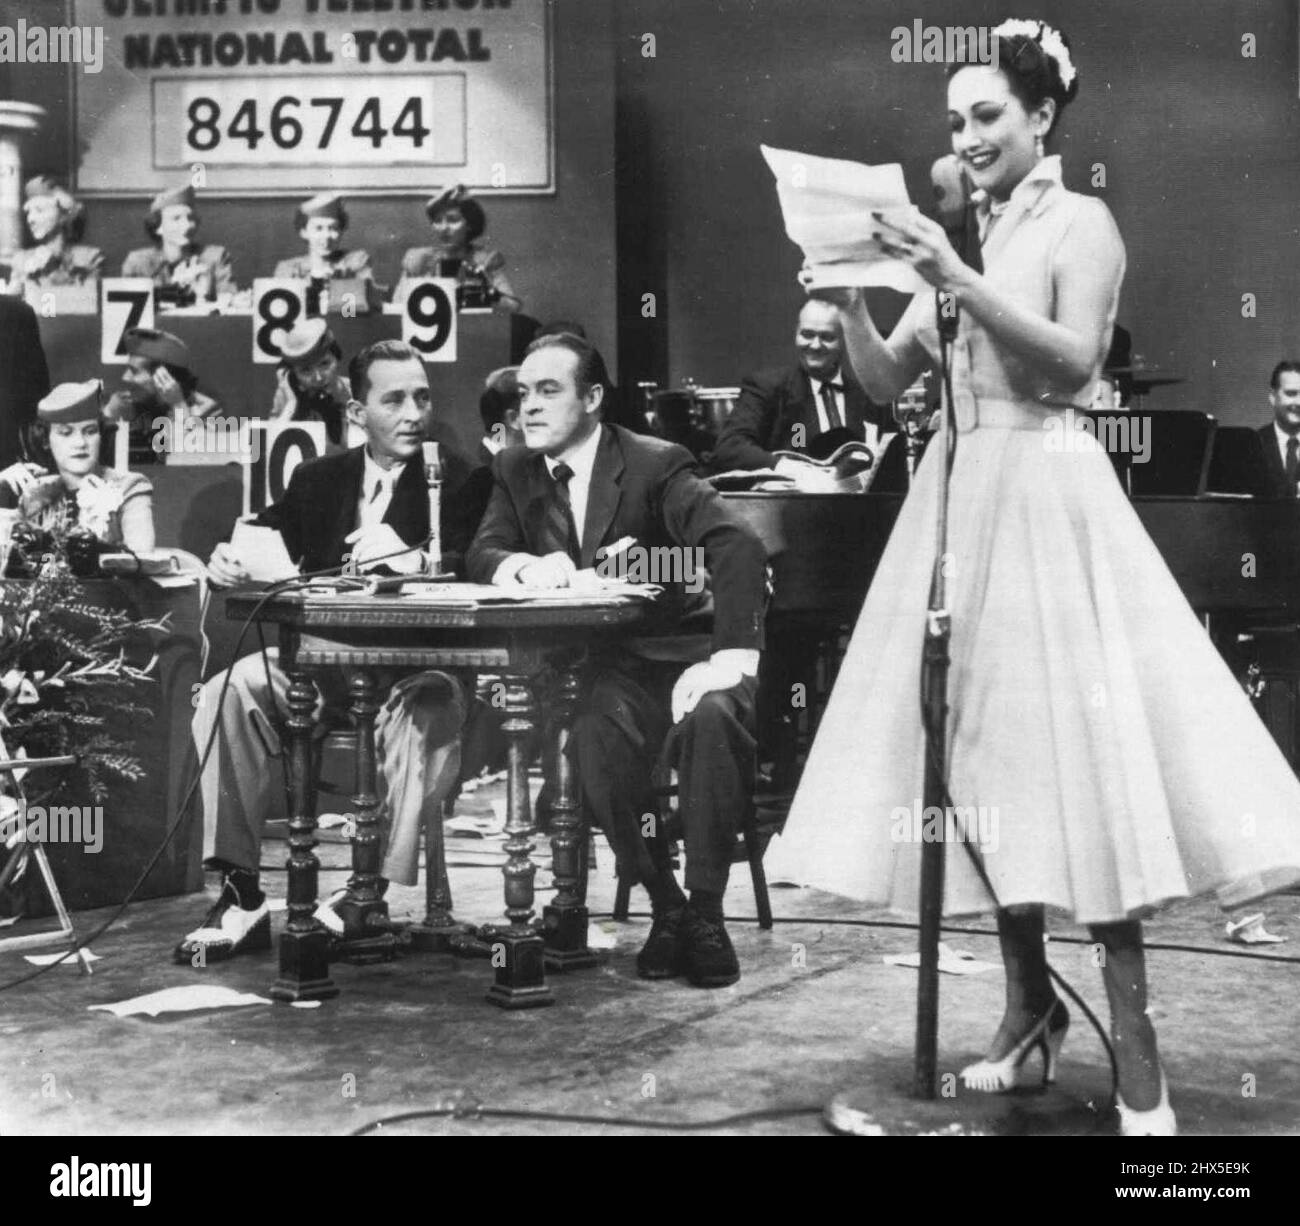 Bing Makes Television Debut--Bing Crosby (left) made his Long-awaited television debut teamed with Bob Hope to Co-emcee the 14 1/2 hour Olympic Telethon. The Coast to Coast TV show raised more than one Million Dollars for the U.S. Olympic Fund. Actress Dorothy Lamour, at right, aided the two in their Long Show. June 22, 1952. (Photo by AP Wirephoto) Stock Photo